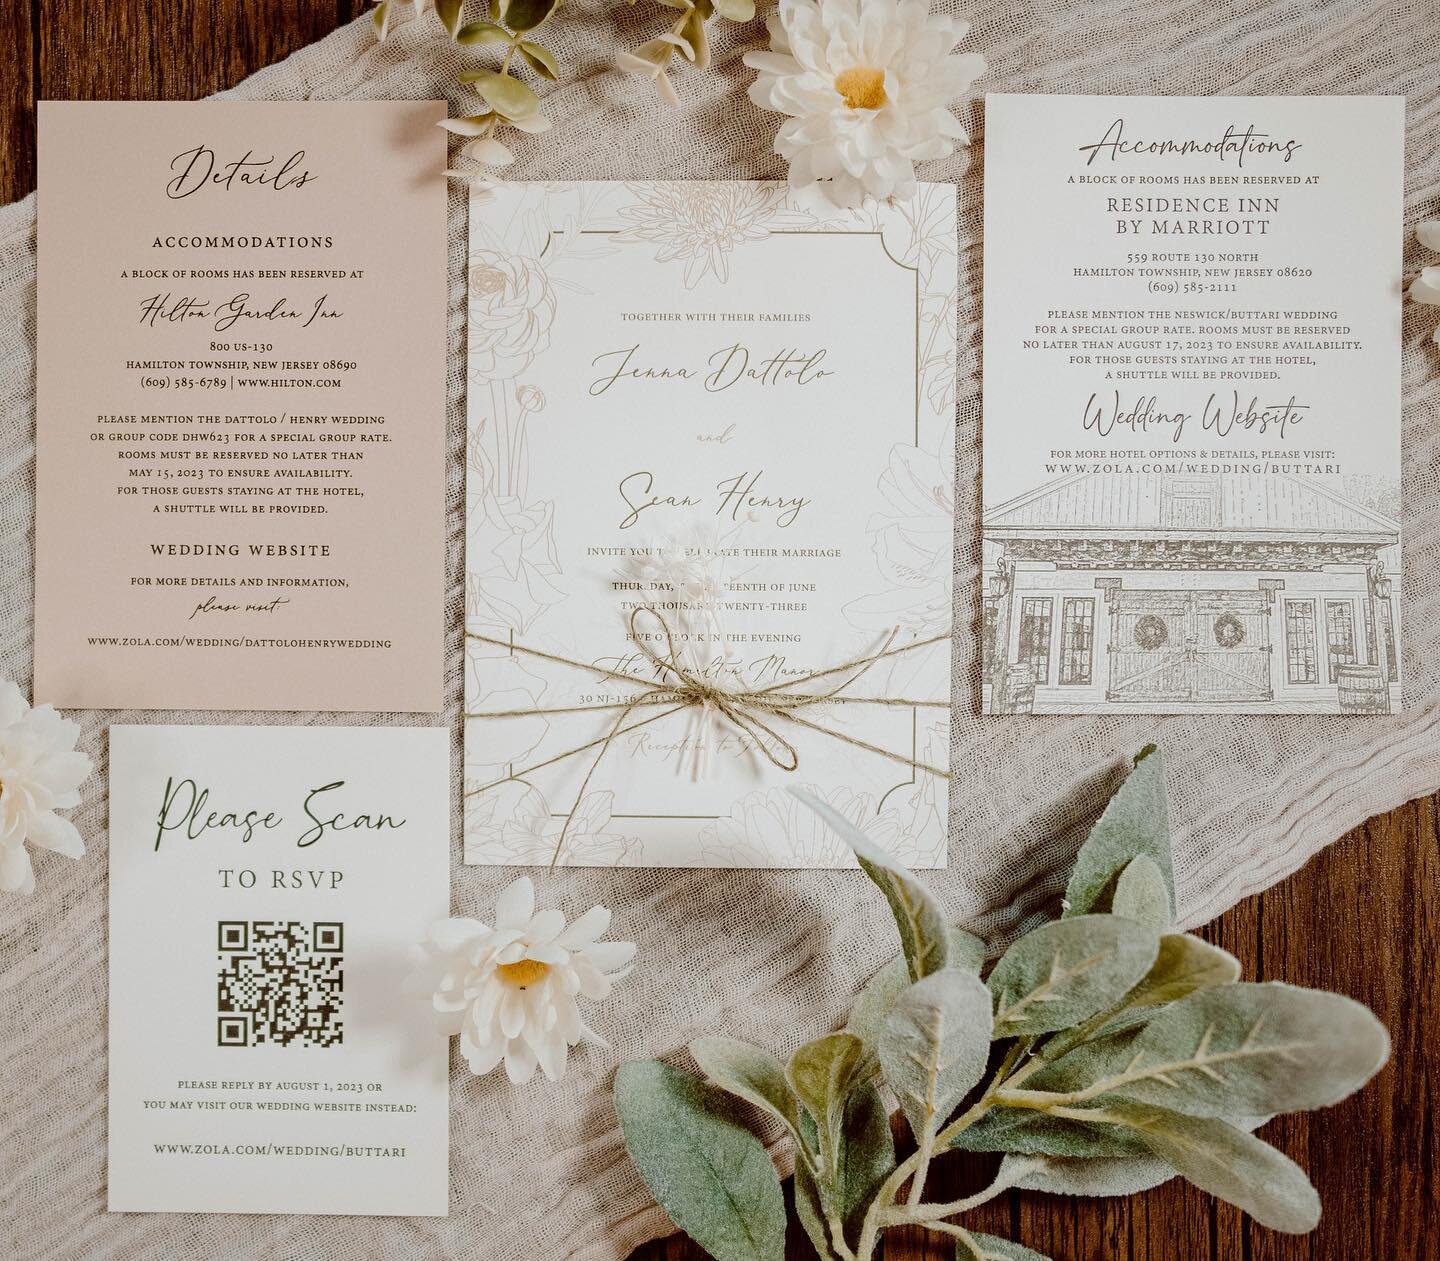 Jenna and Sean&rsquo;s summer celebration invites were created with a gorgeous floral border, a beautiful design of their venue and a neutral bellyband to tie it all together. 

Congratulations Jenna and Sean!! We are so excited for your summer weddi